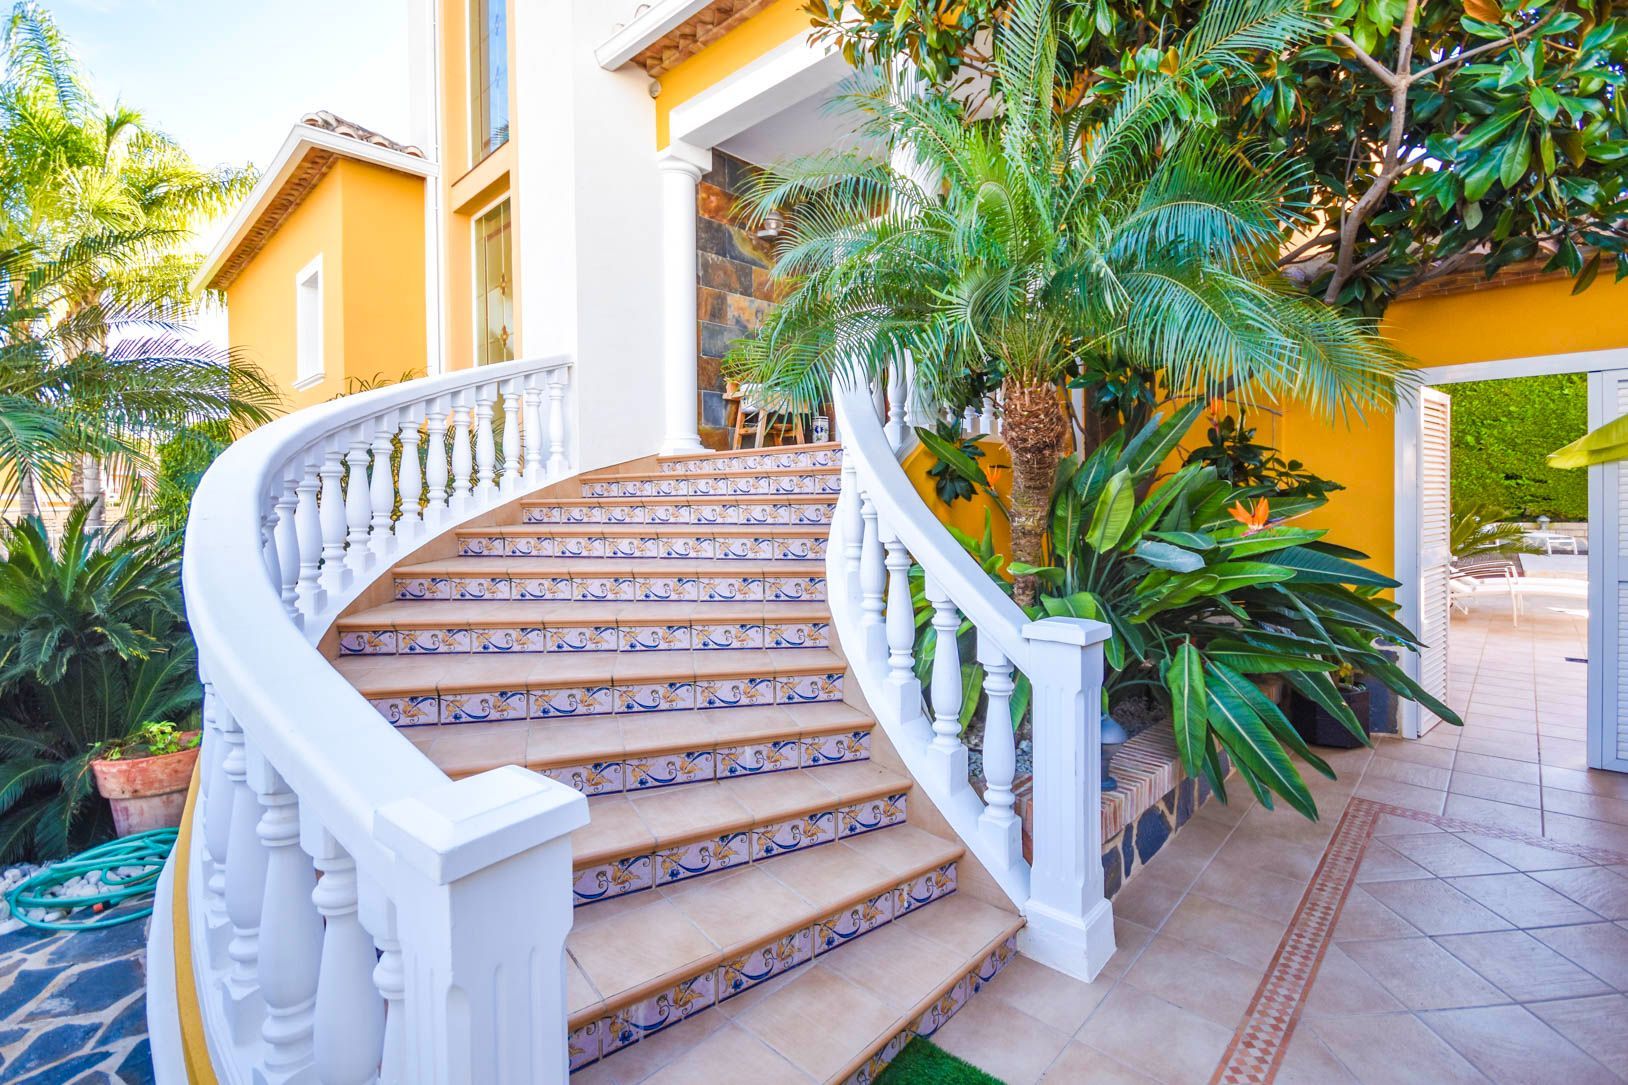 MAGNIFICENT DETACHED VILLA 600 METRES FROM THE BEACH